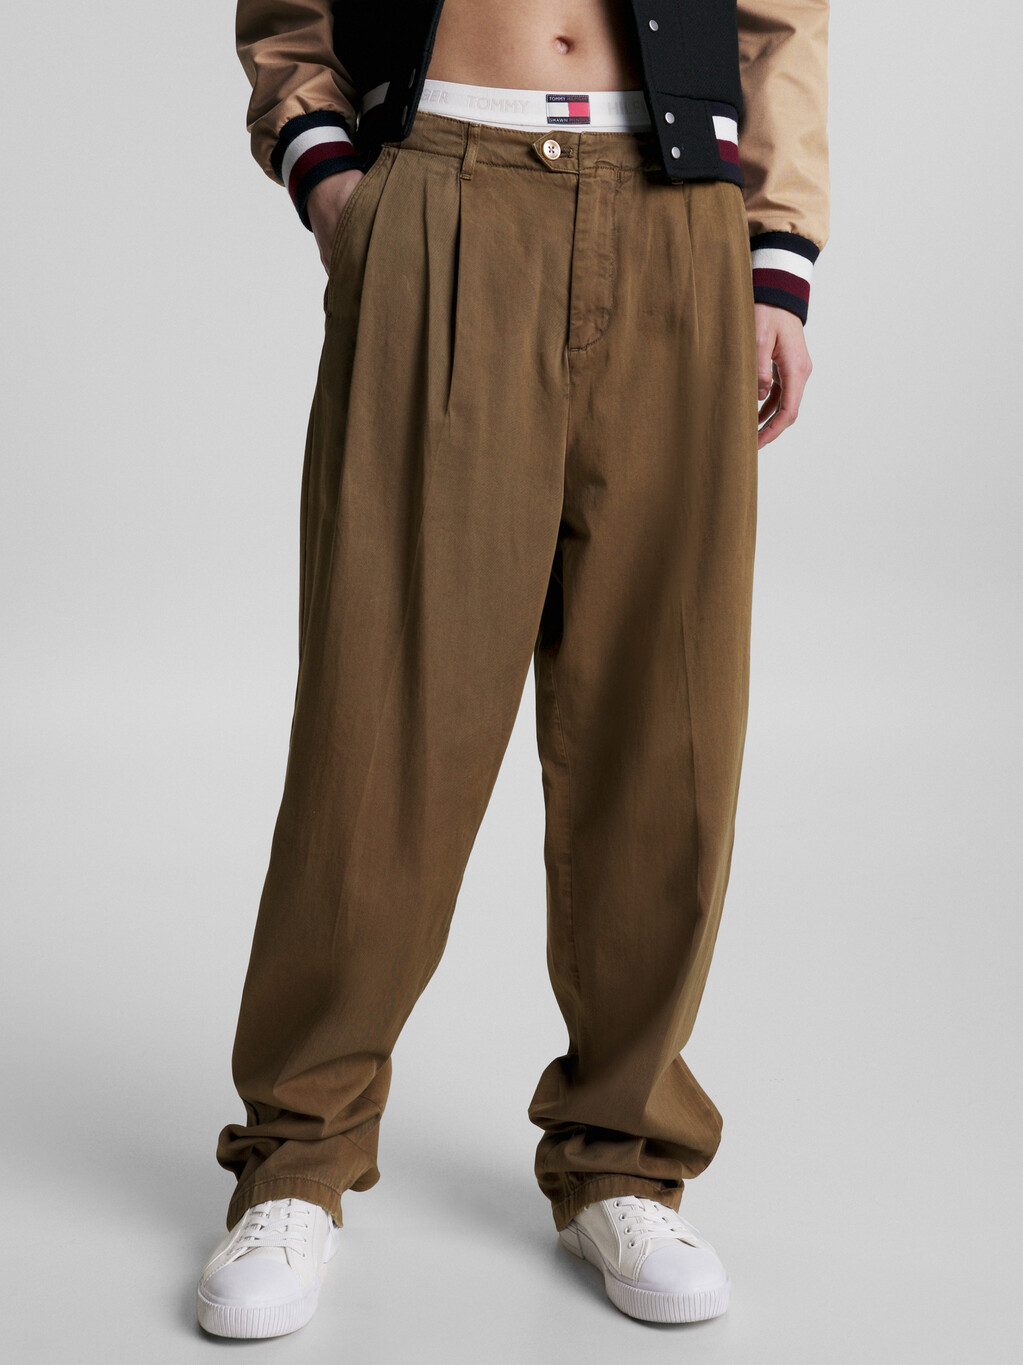 Tommy Hilfiger X Shawn Mendes Pleated Trousers, Countryside Khaki, hi-res